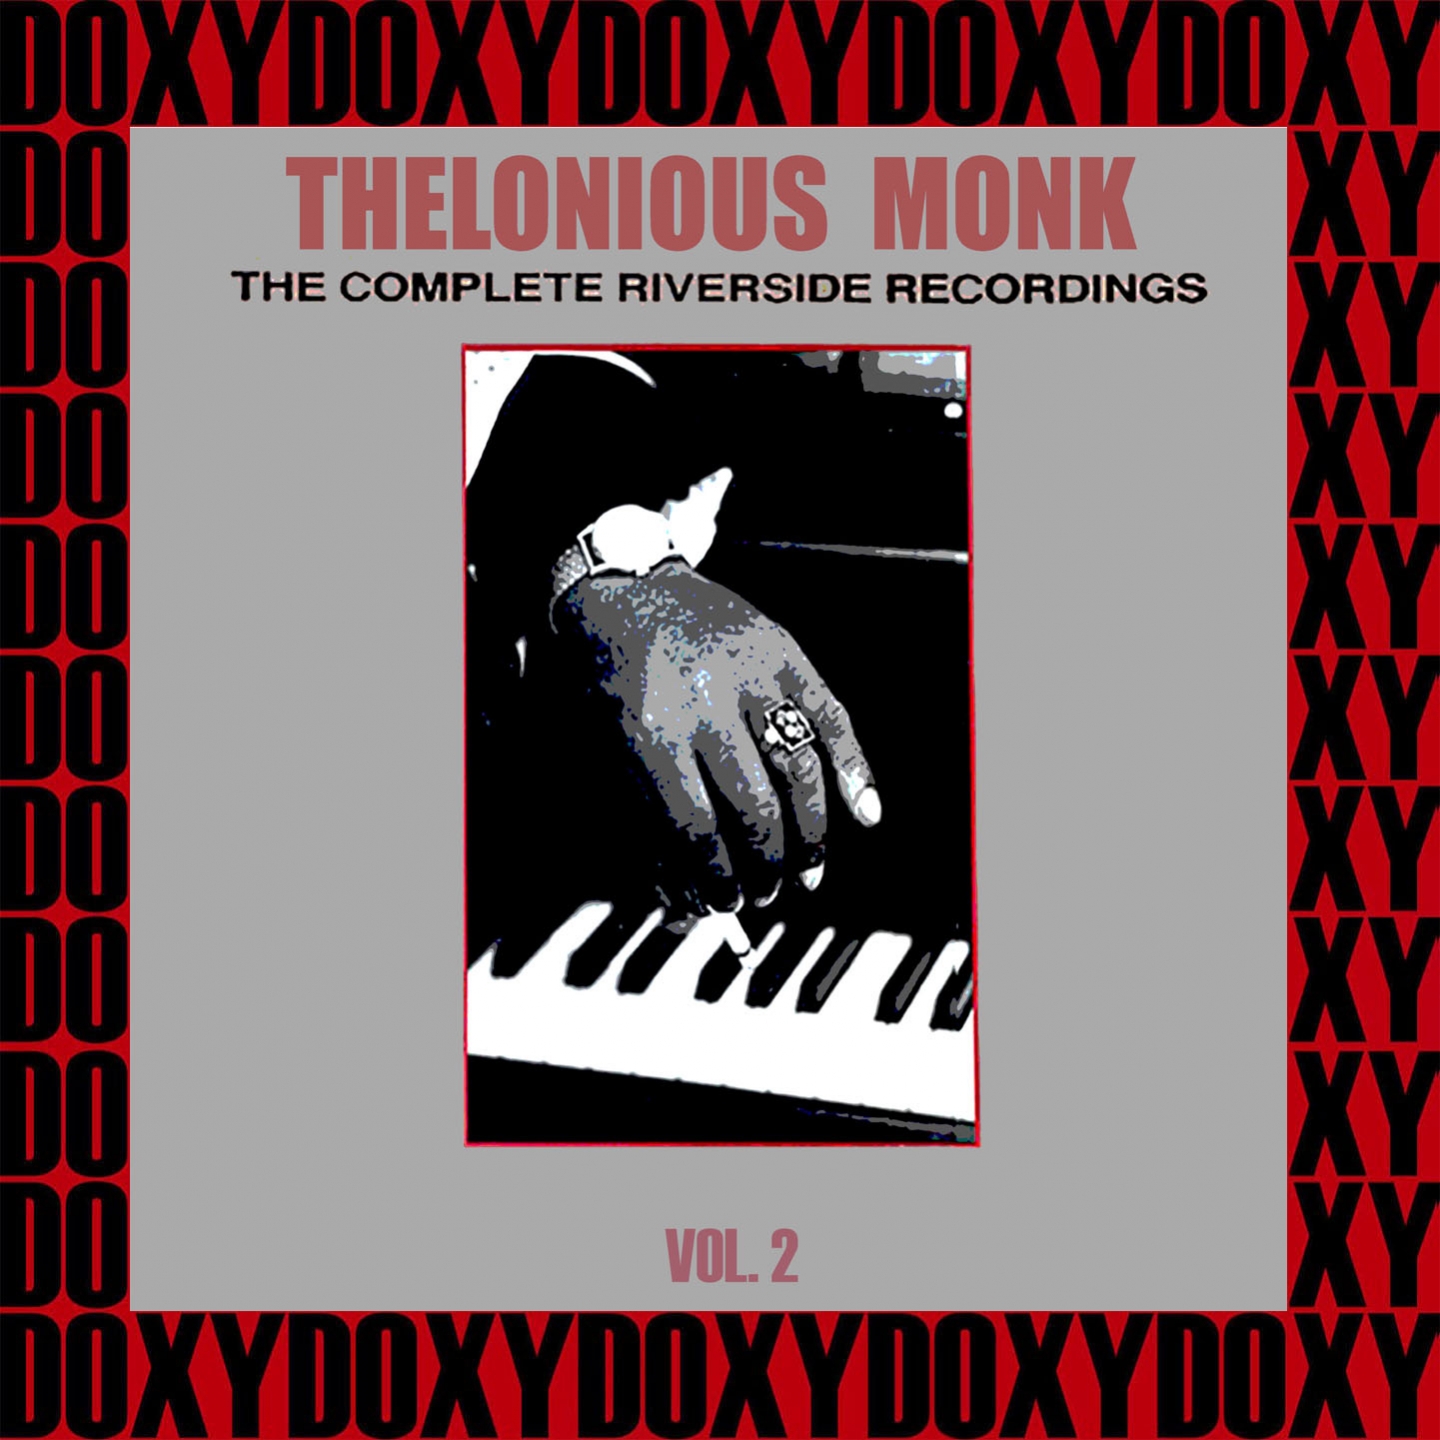 The Complete Riverside Recordings, Vol. 2 (Hd Remastered Edition, Doxy Collection)